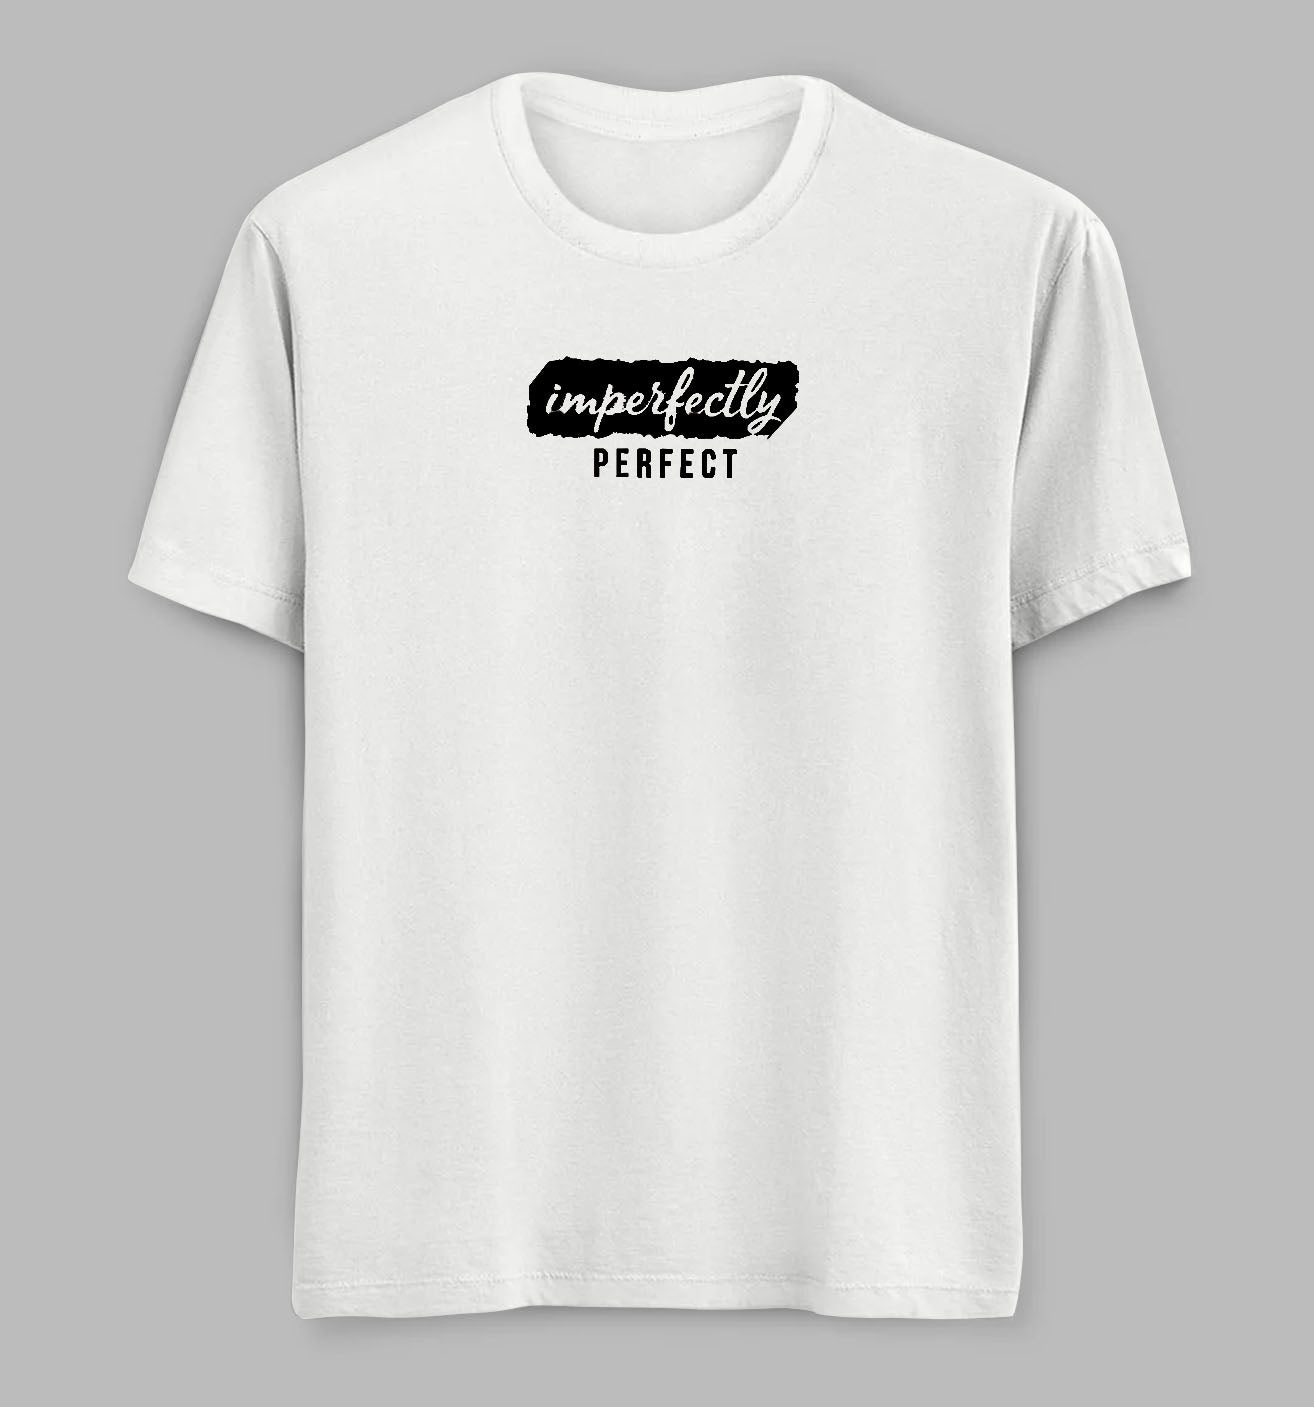 Imperfectly Perfect Tees/ Tshirts